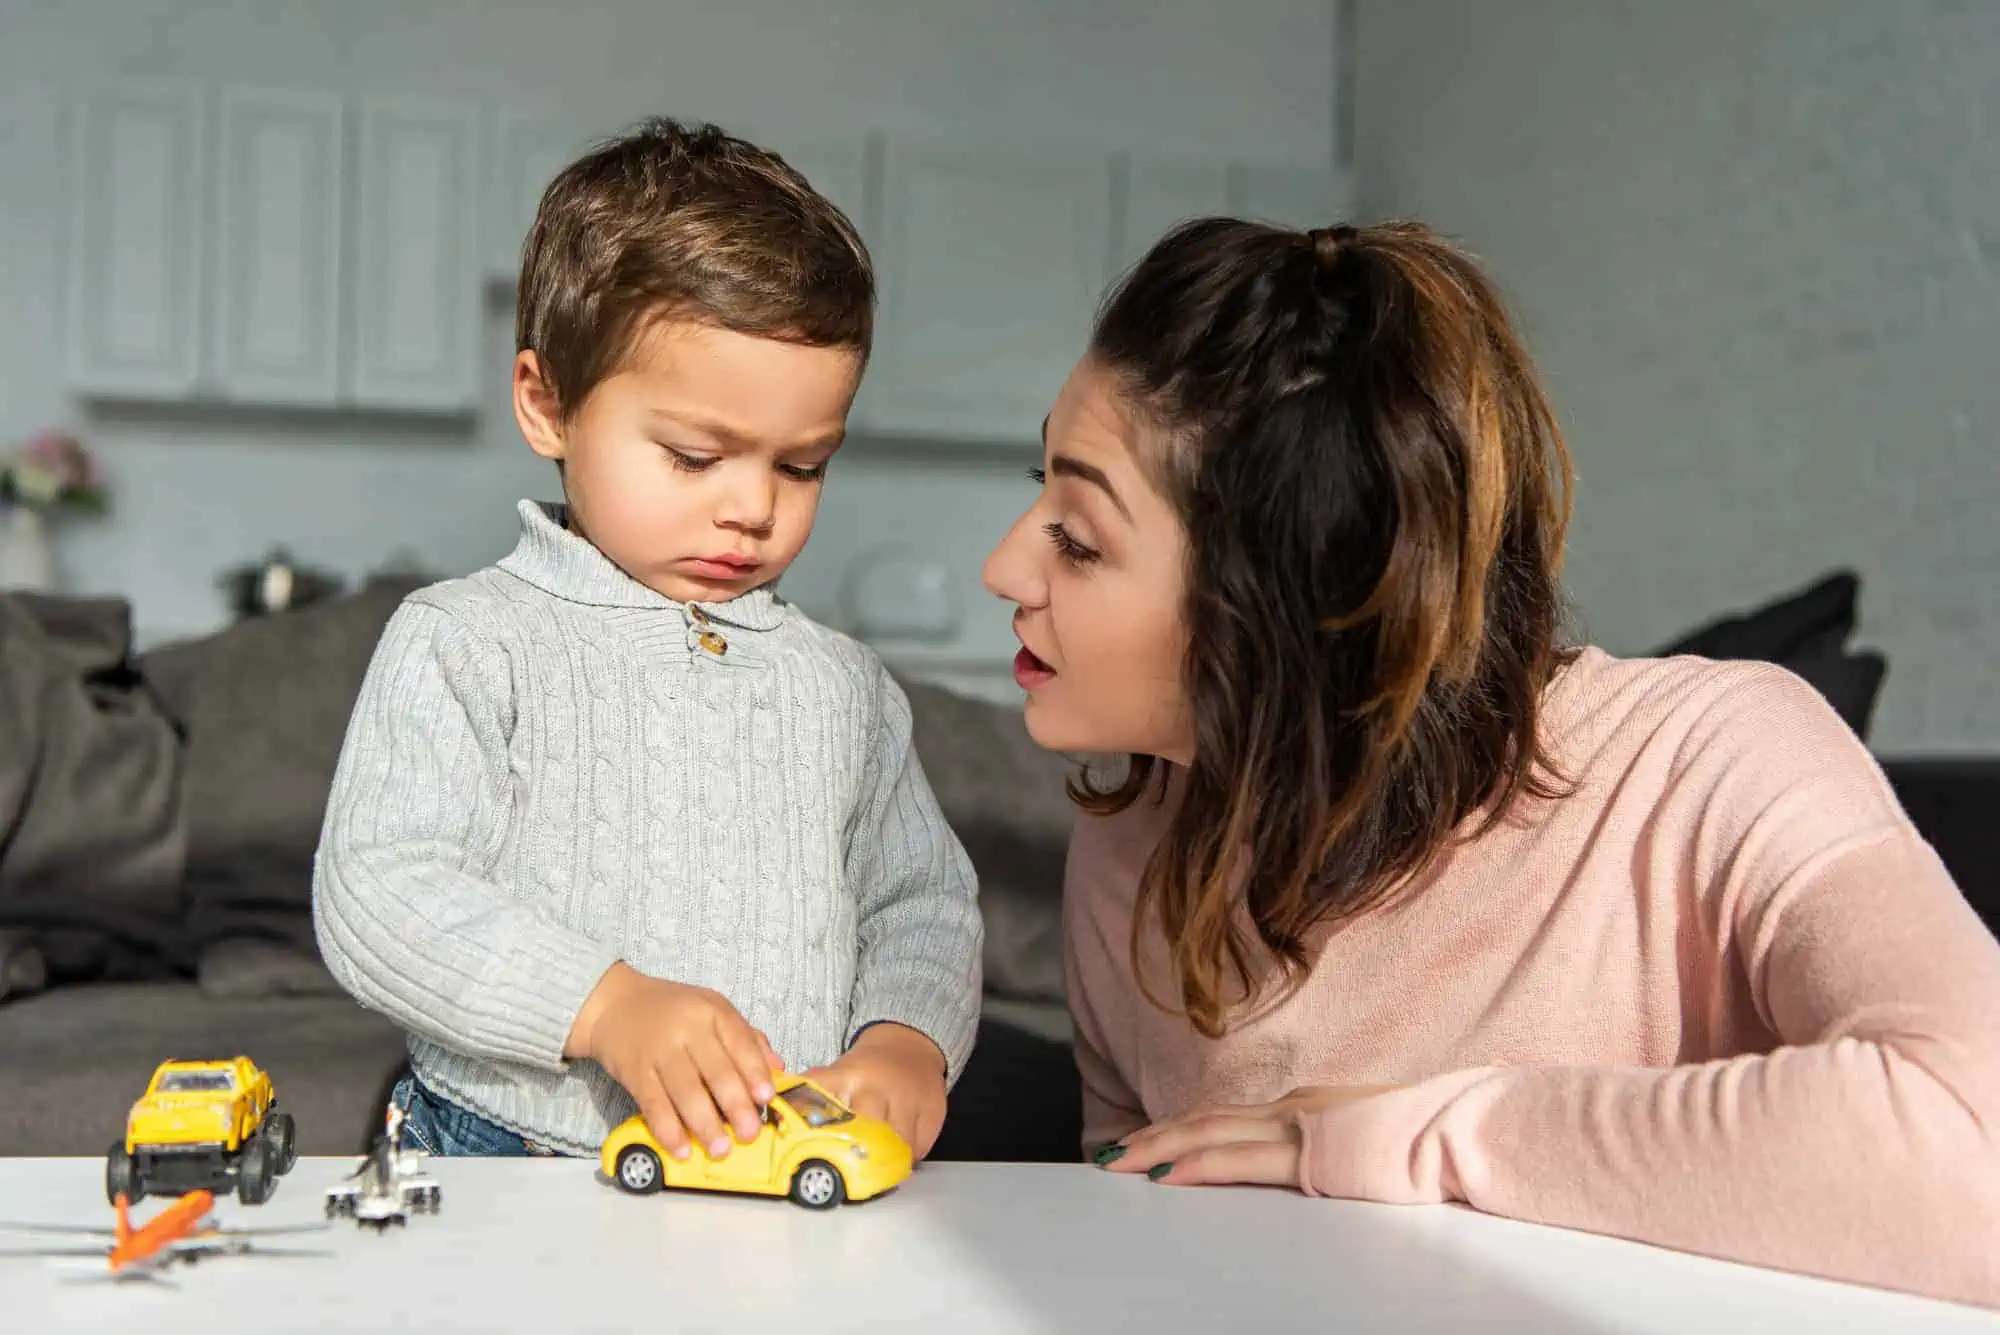 A woman and a child playing with a toy car